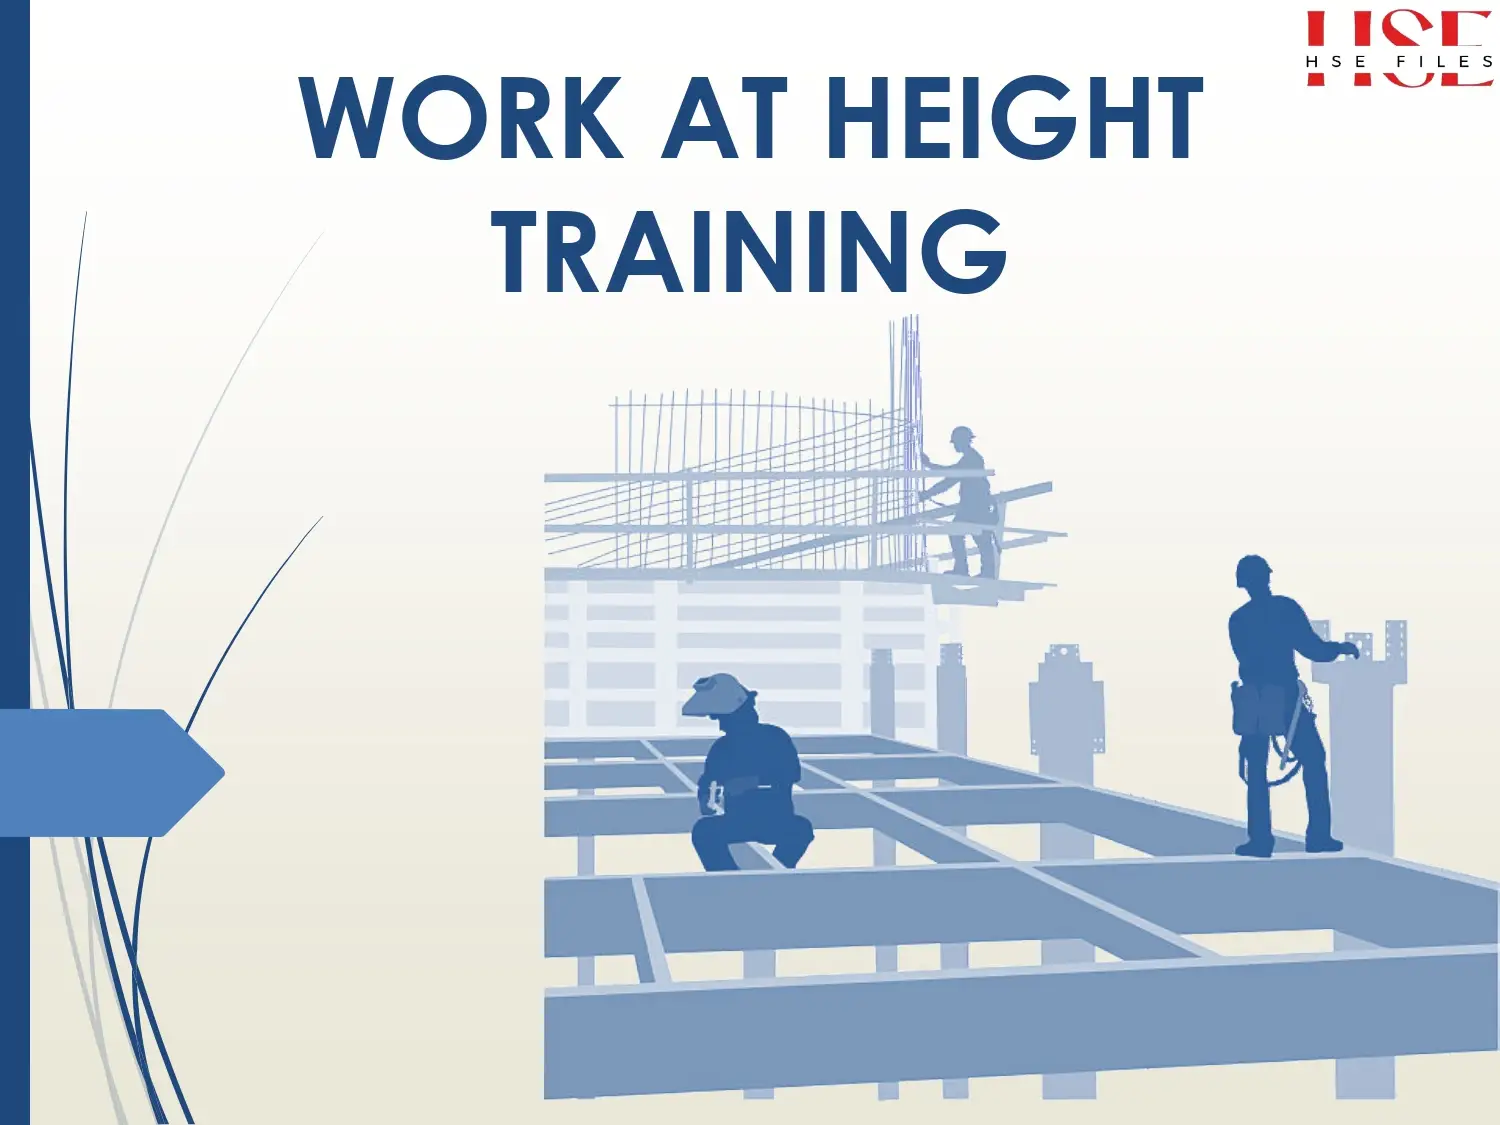 Work At Height Training